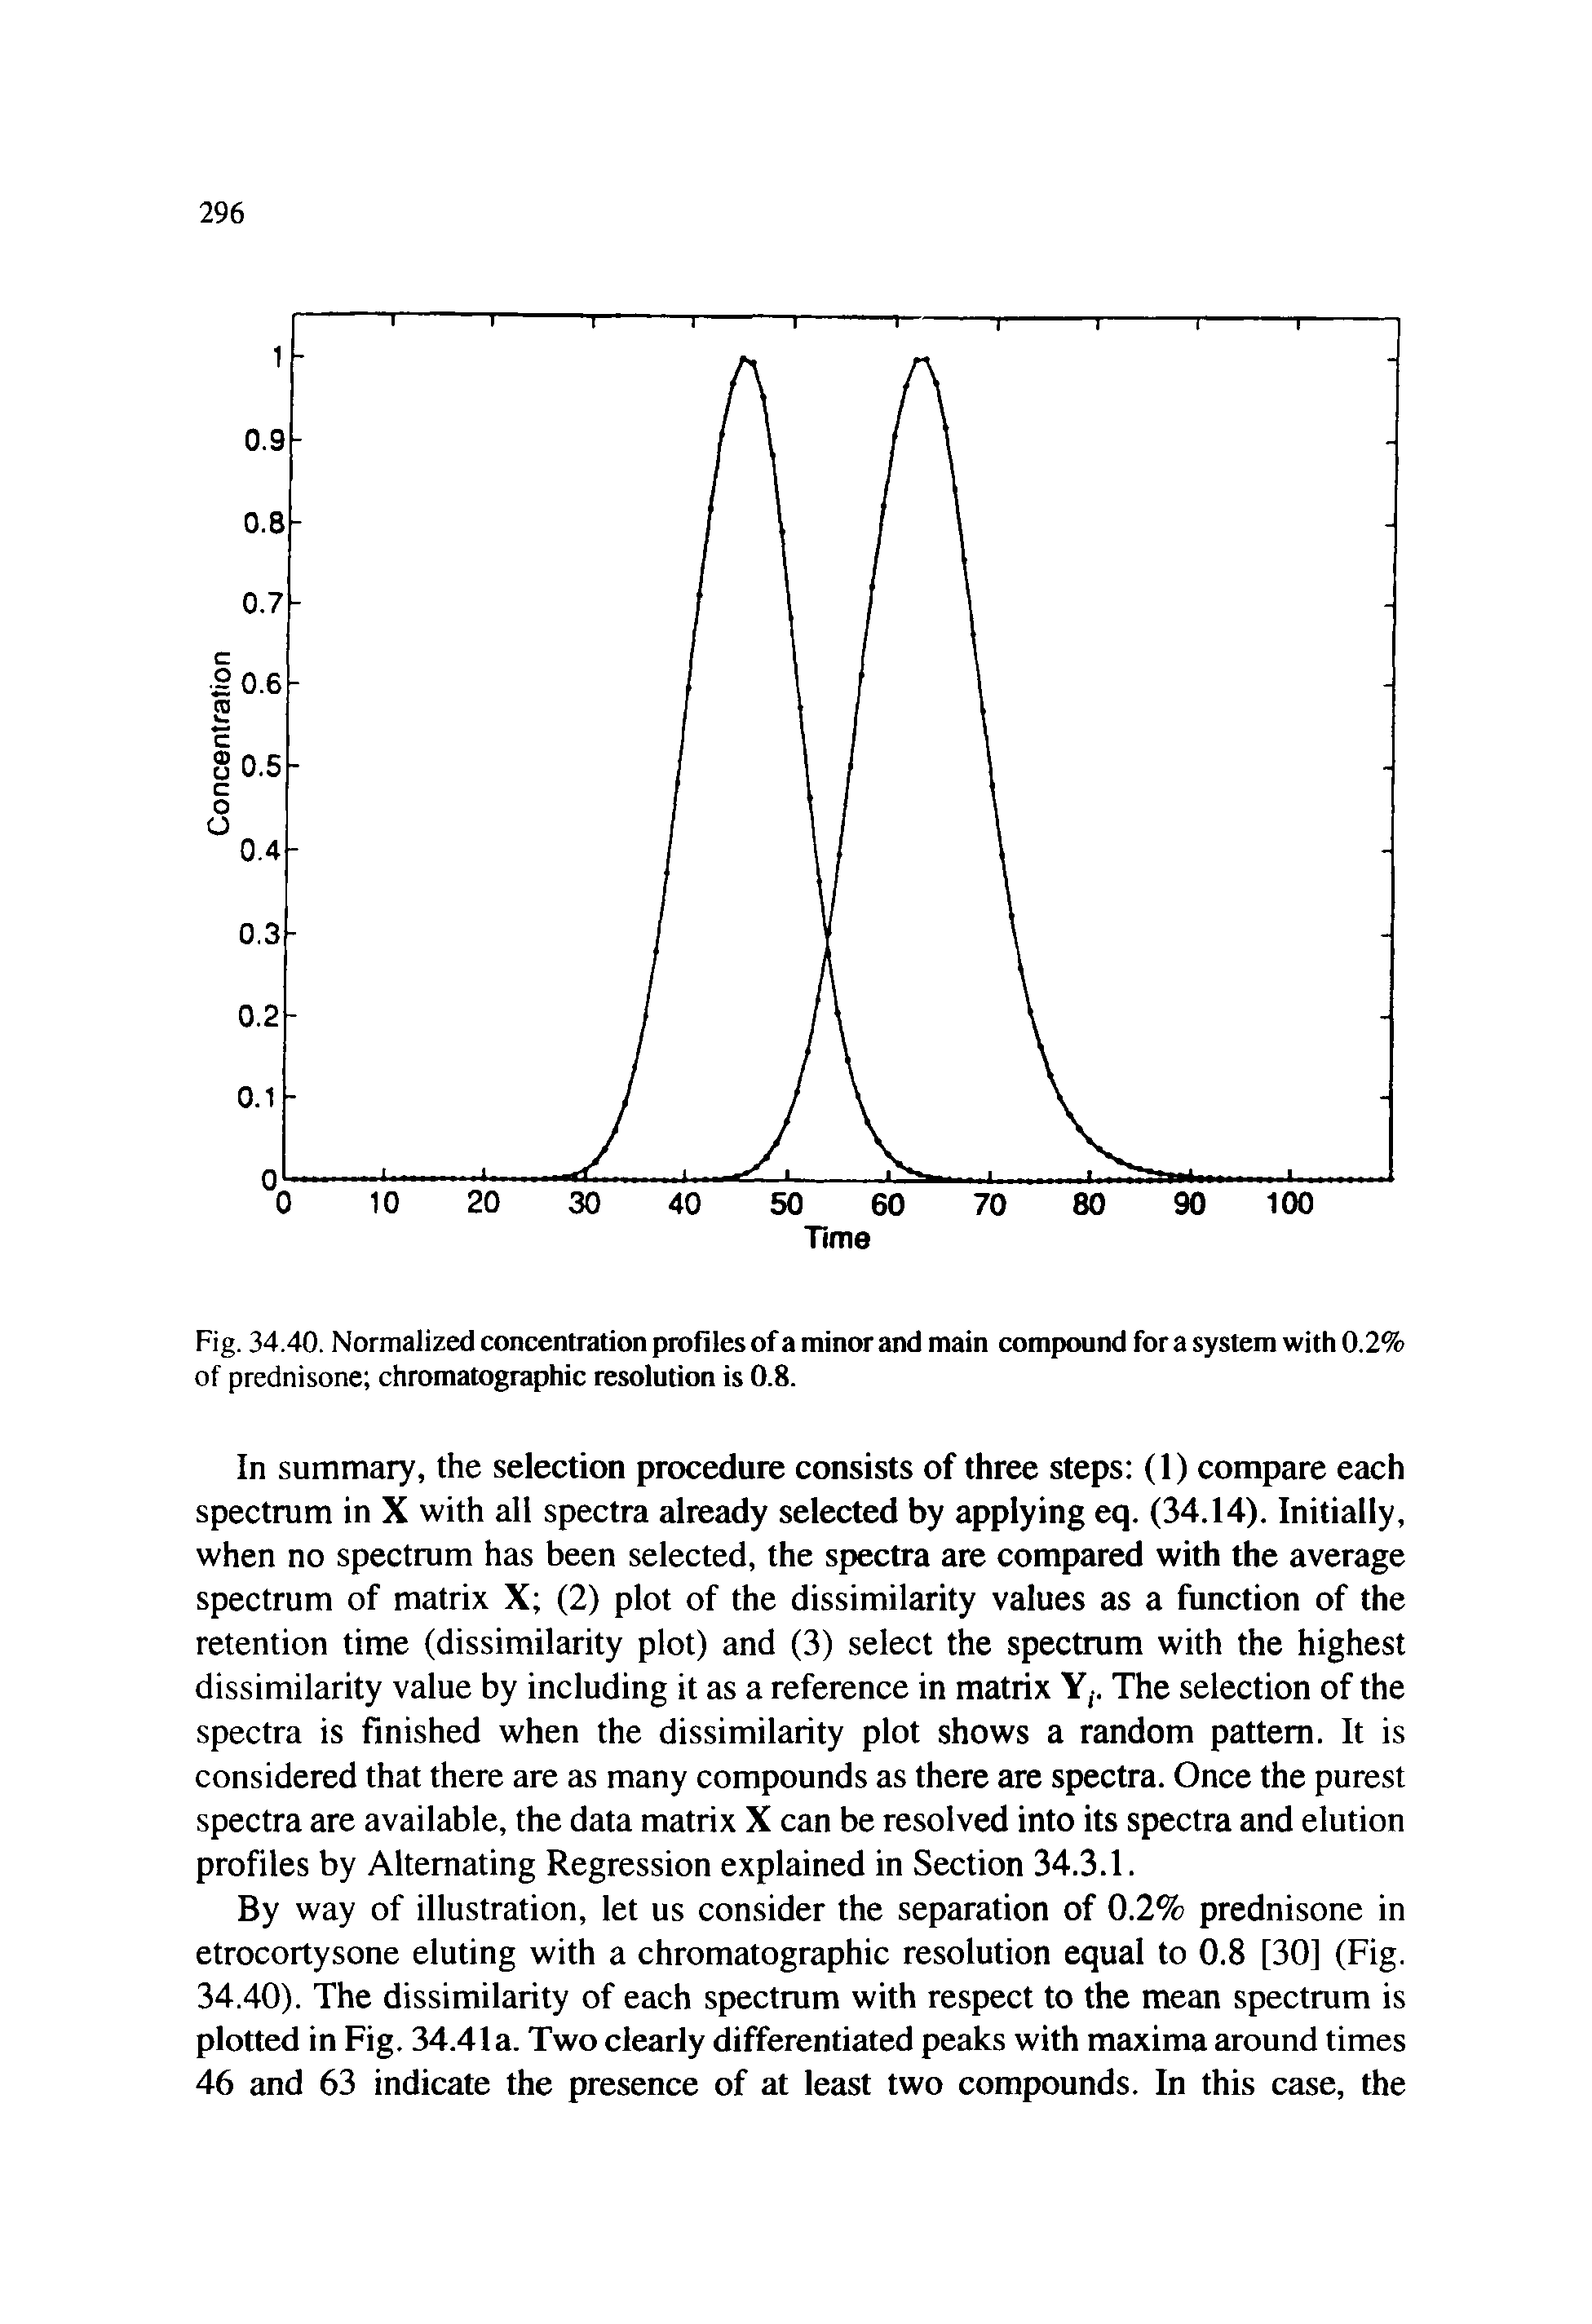 Fig. 34.40. Normalized concentration profiles of a minor and main compound for a system with 0.2% of prednisone chromatographic resolution is 0.8.